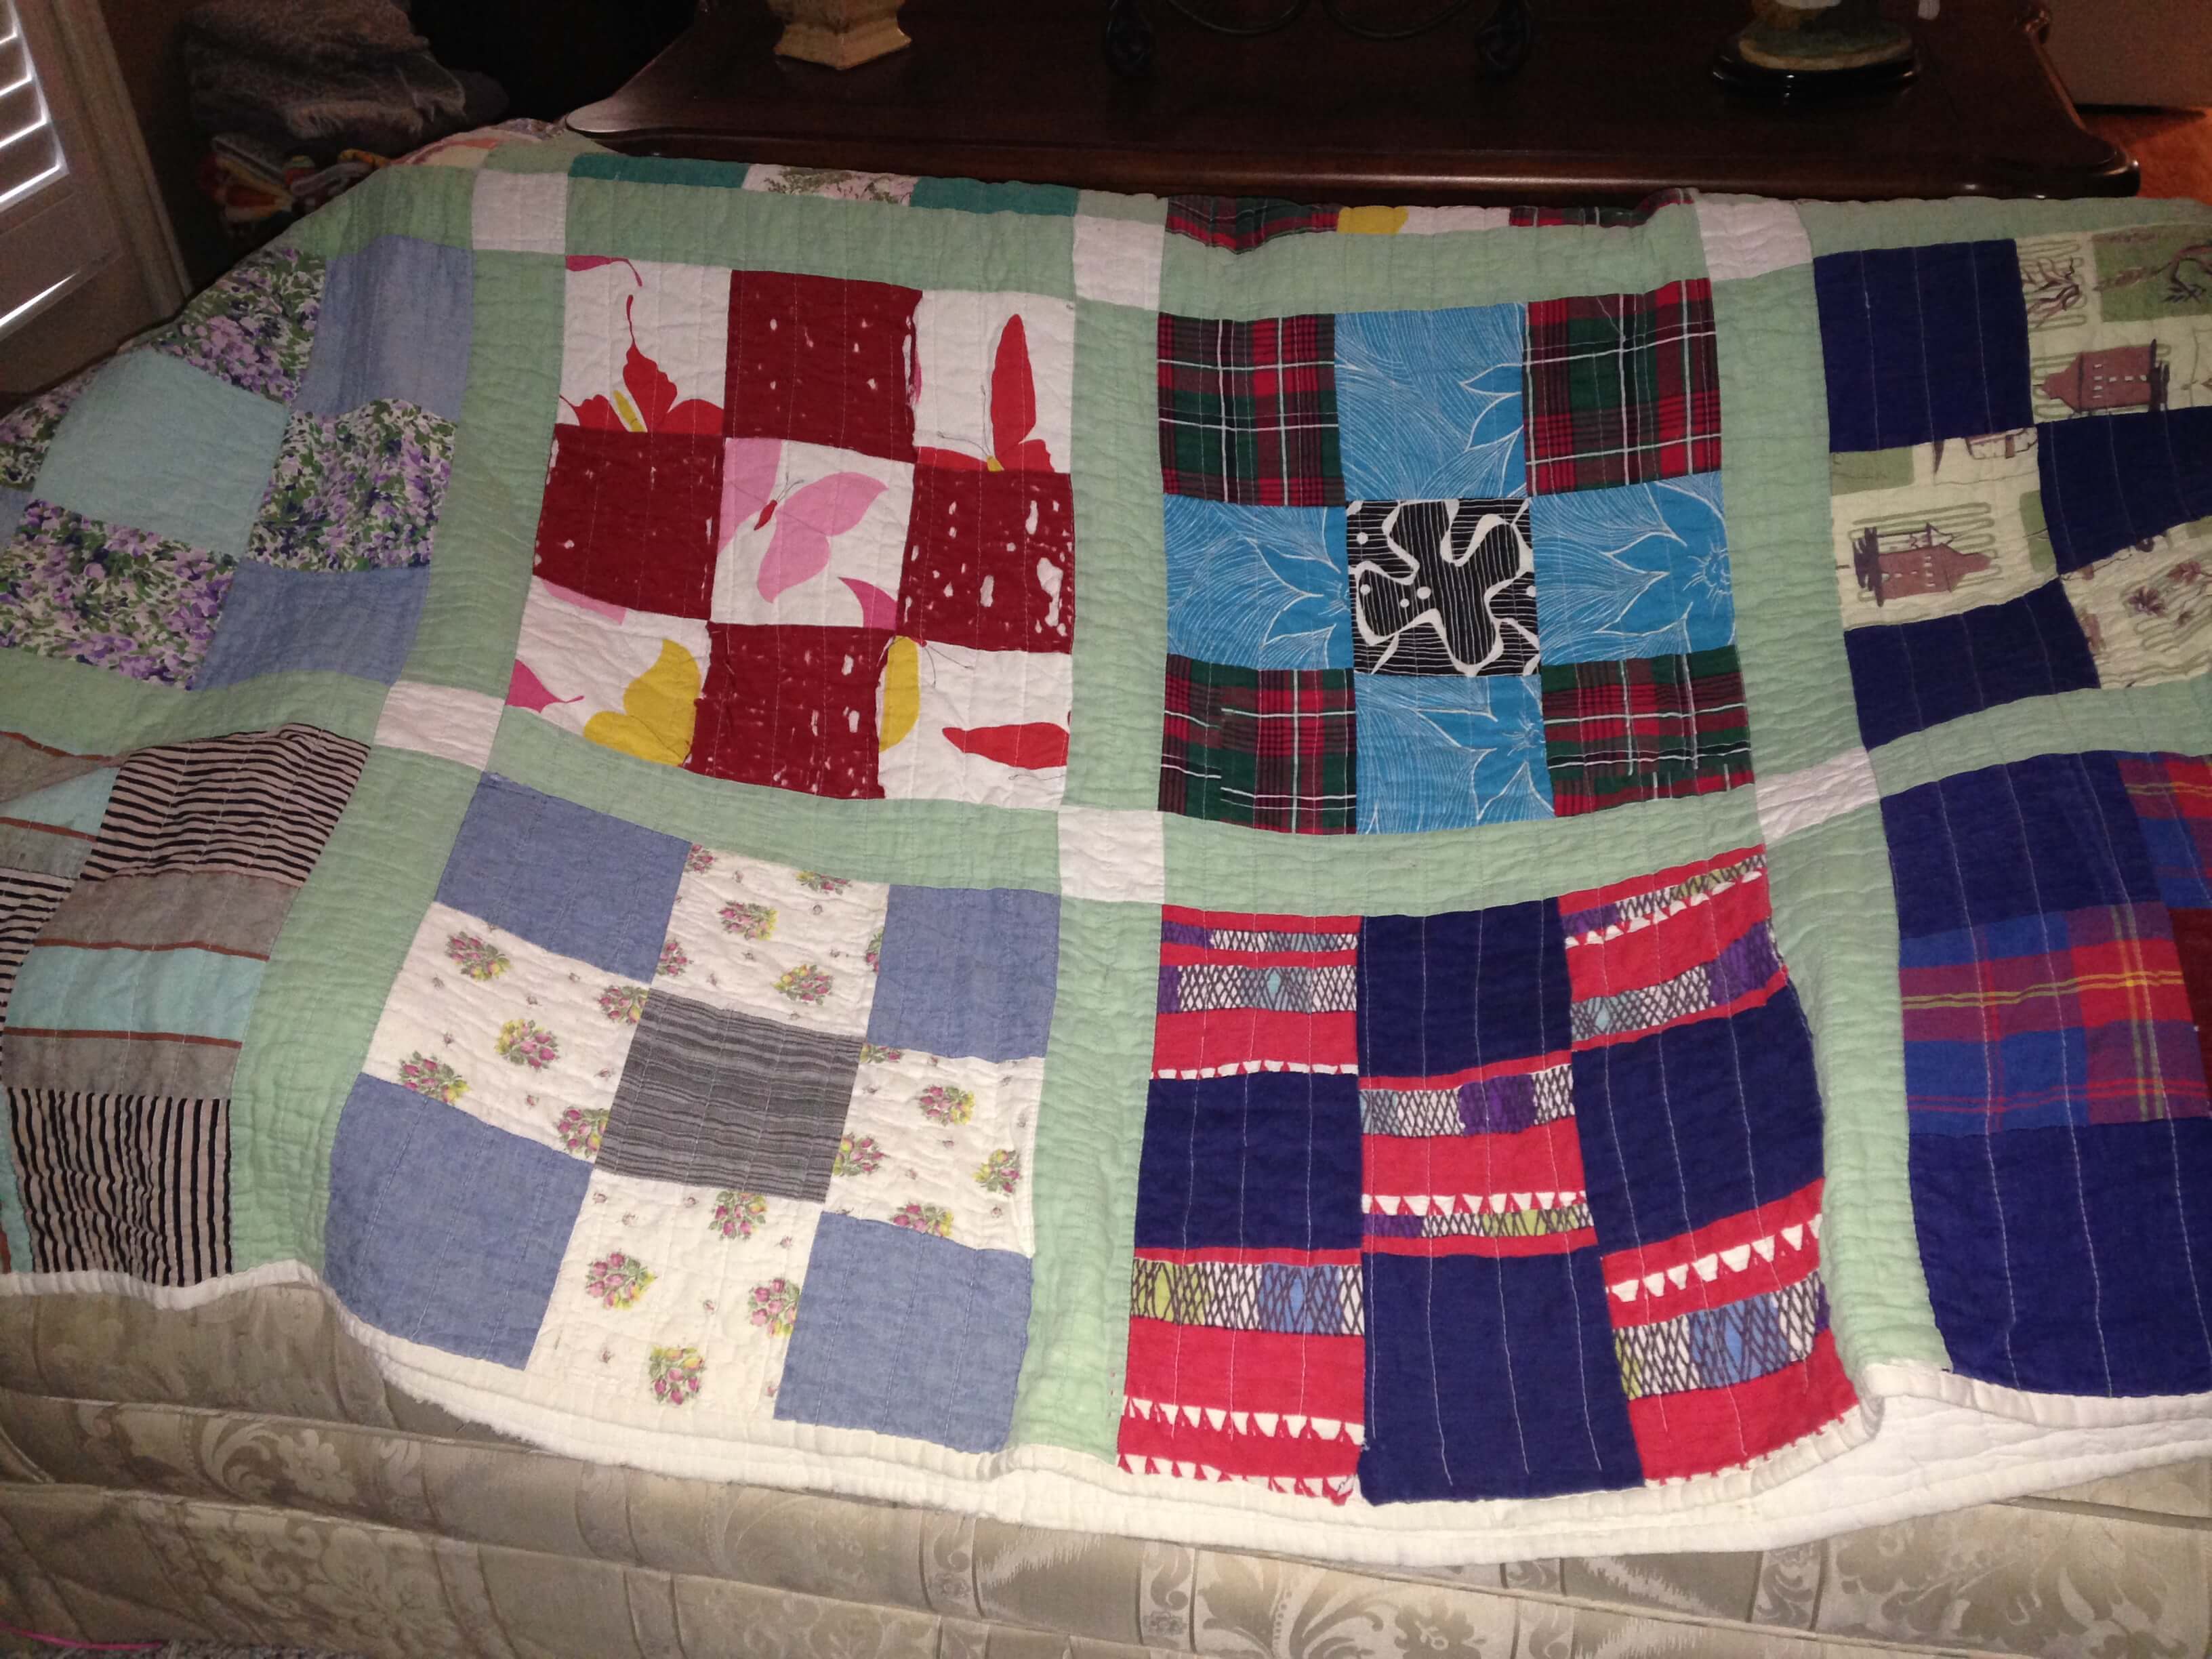 A family treasure. My mom's scrappy nine-patch quilt made for her by her sister from outgrown clothes.